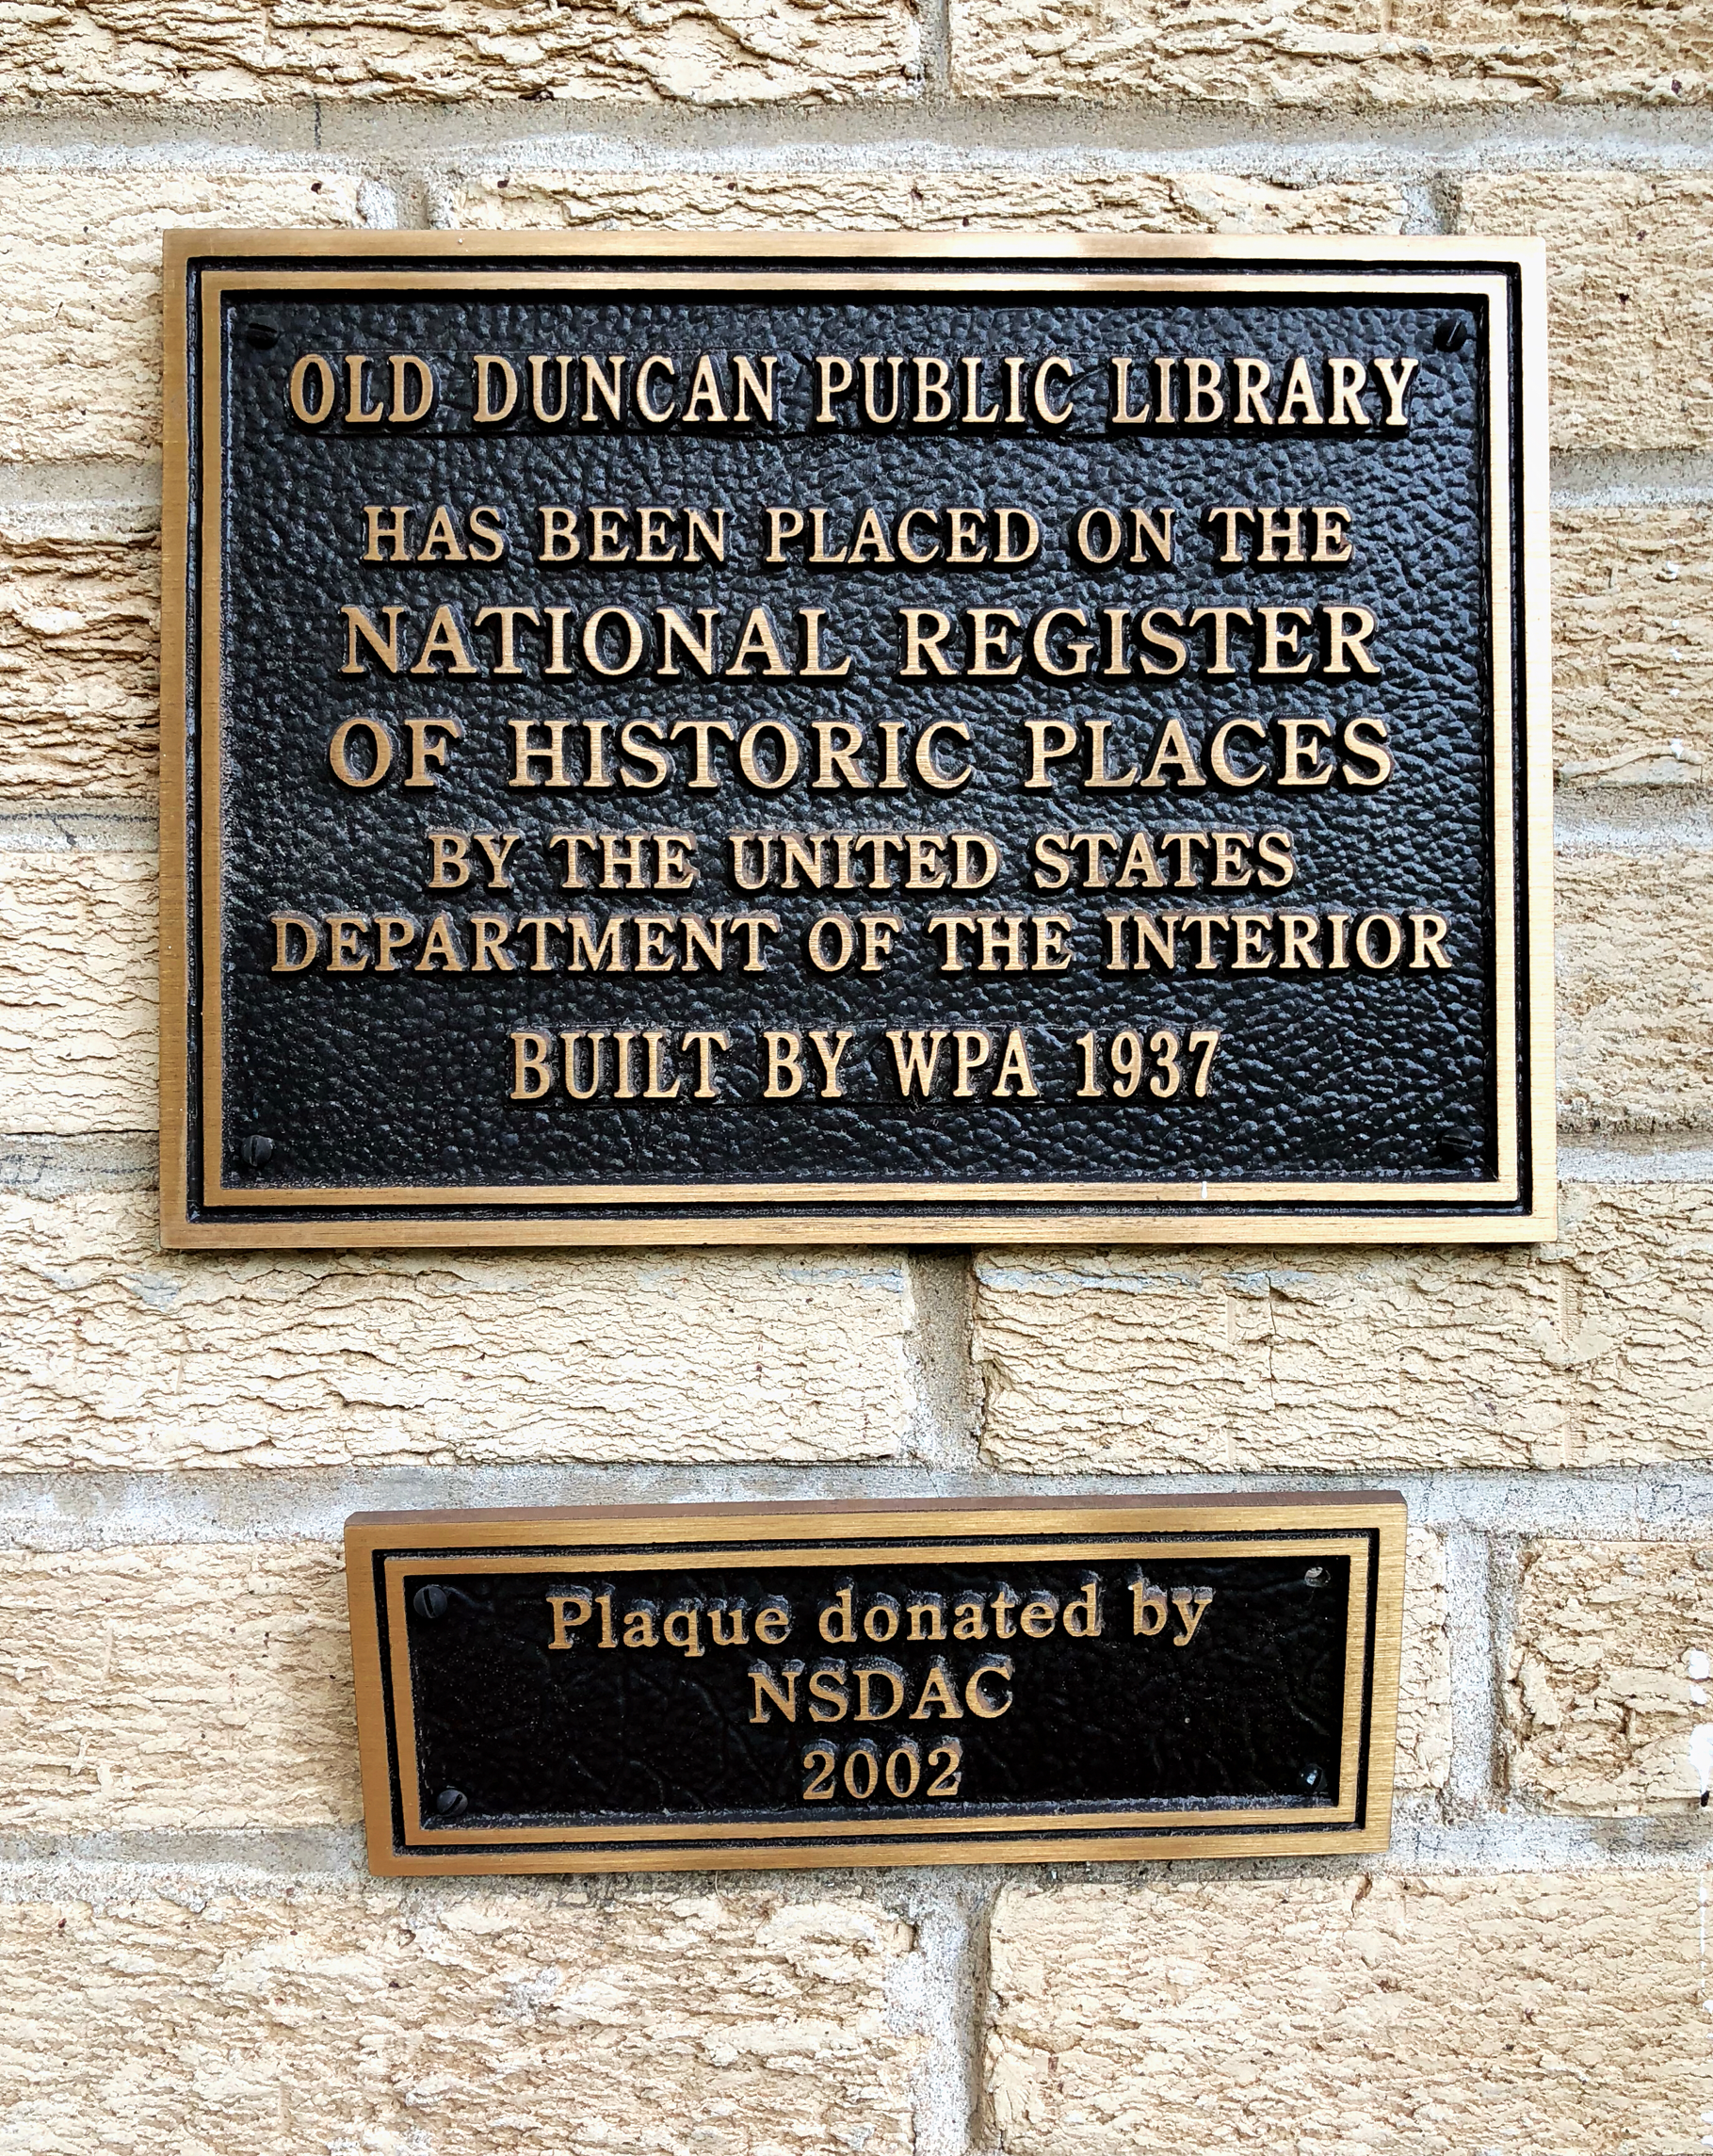 Old Duncan Public Library has been placed on the National Register of Historic Places by the United States Department of the Interior
-Built by WPA 1937-